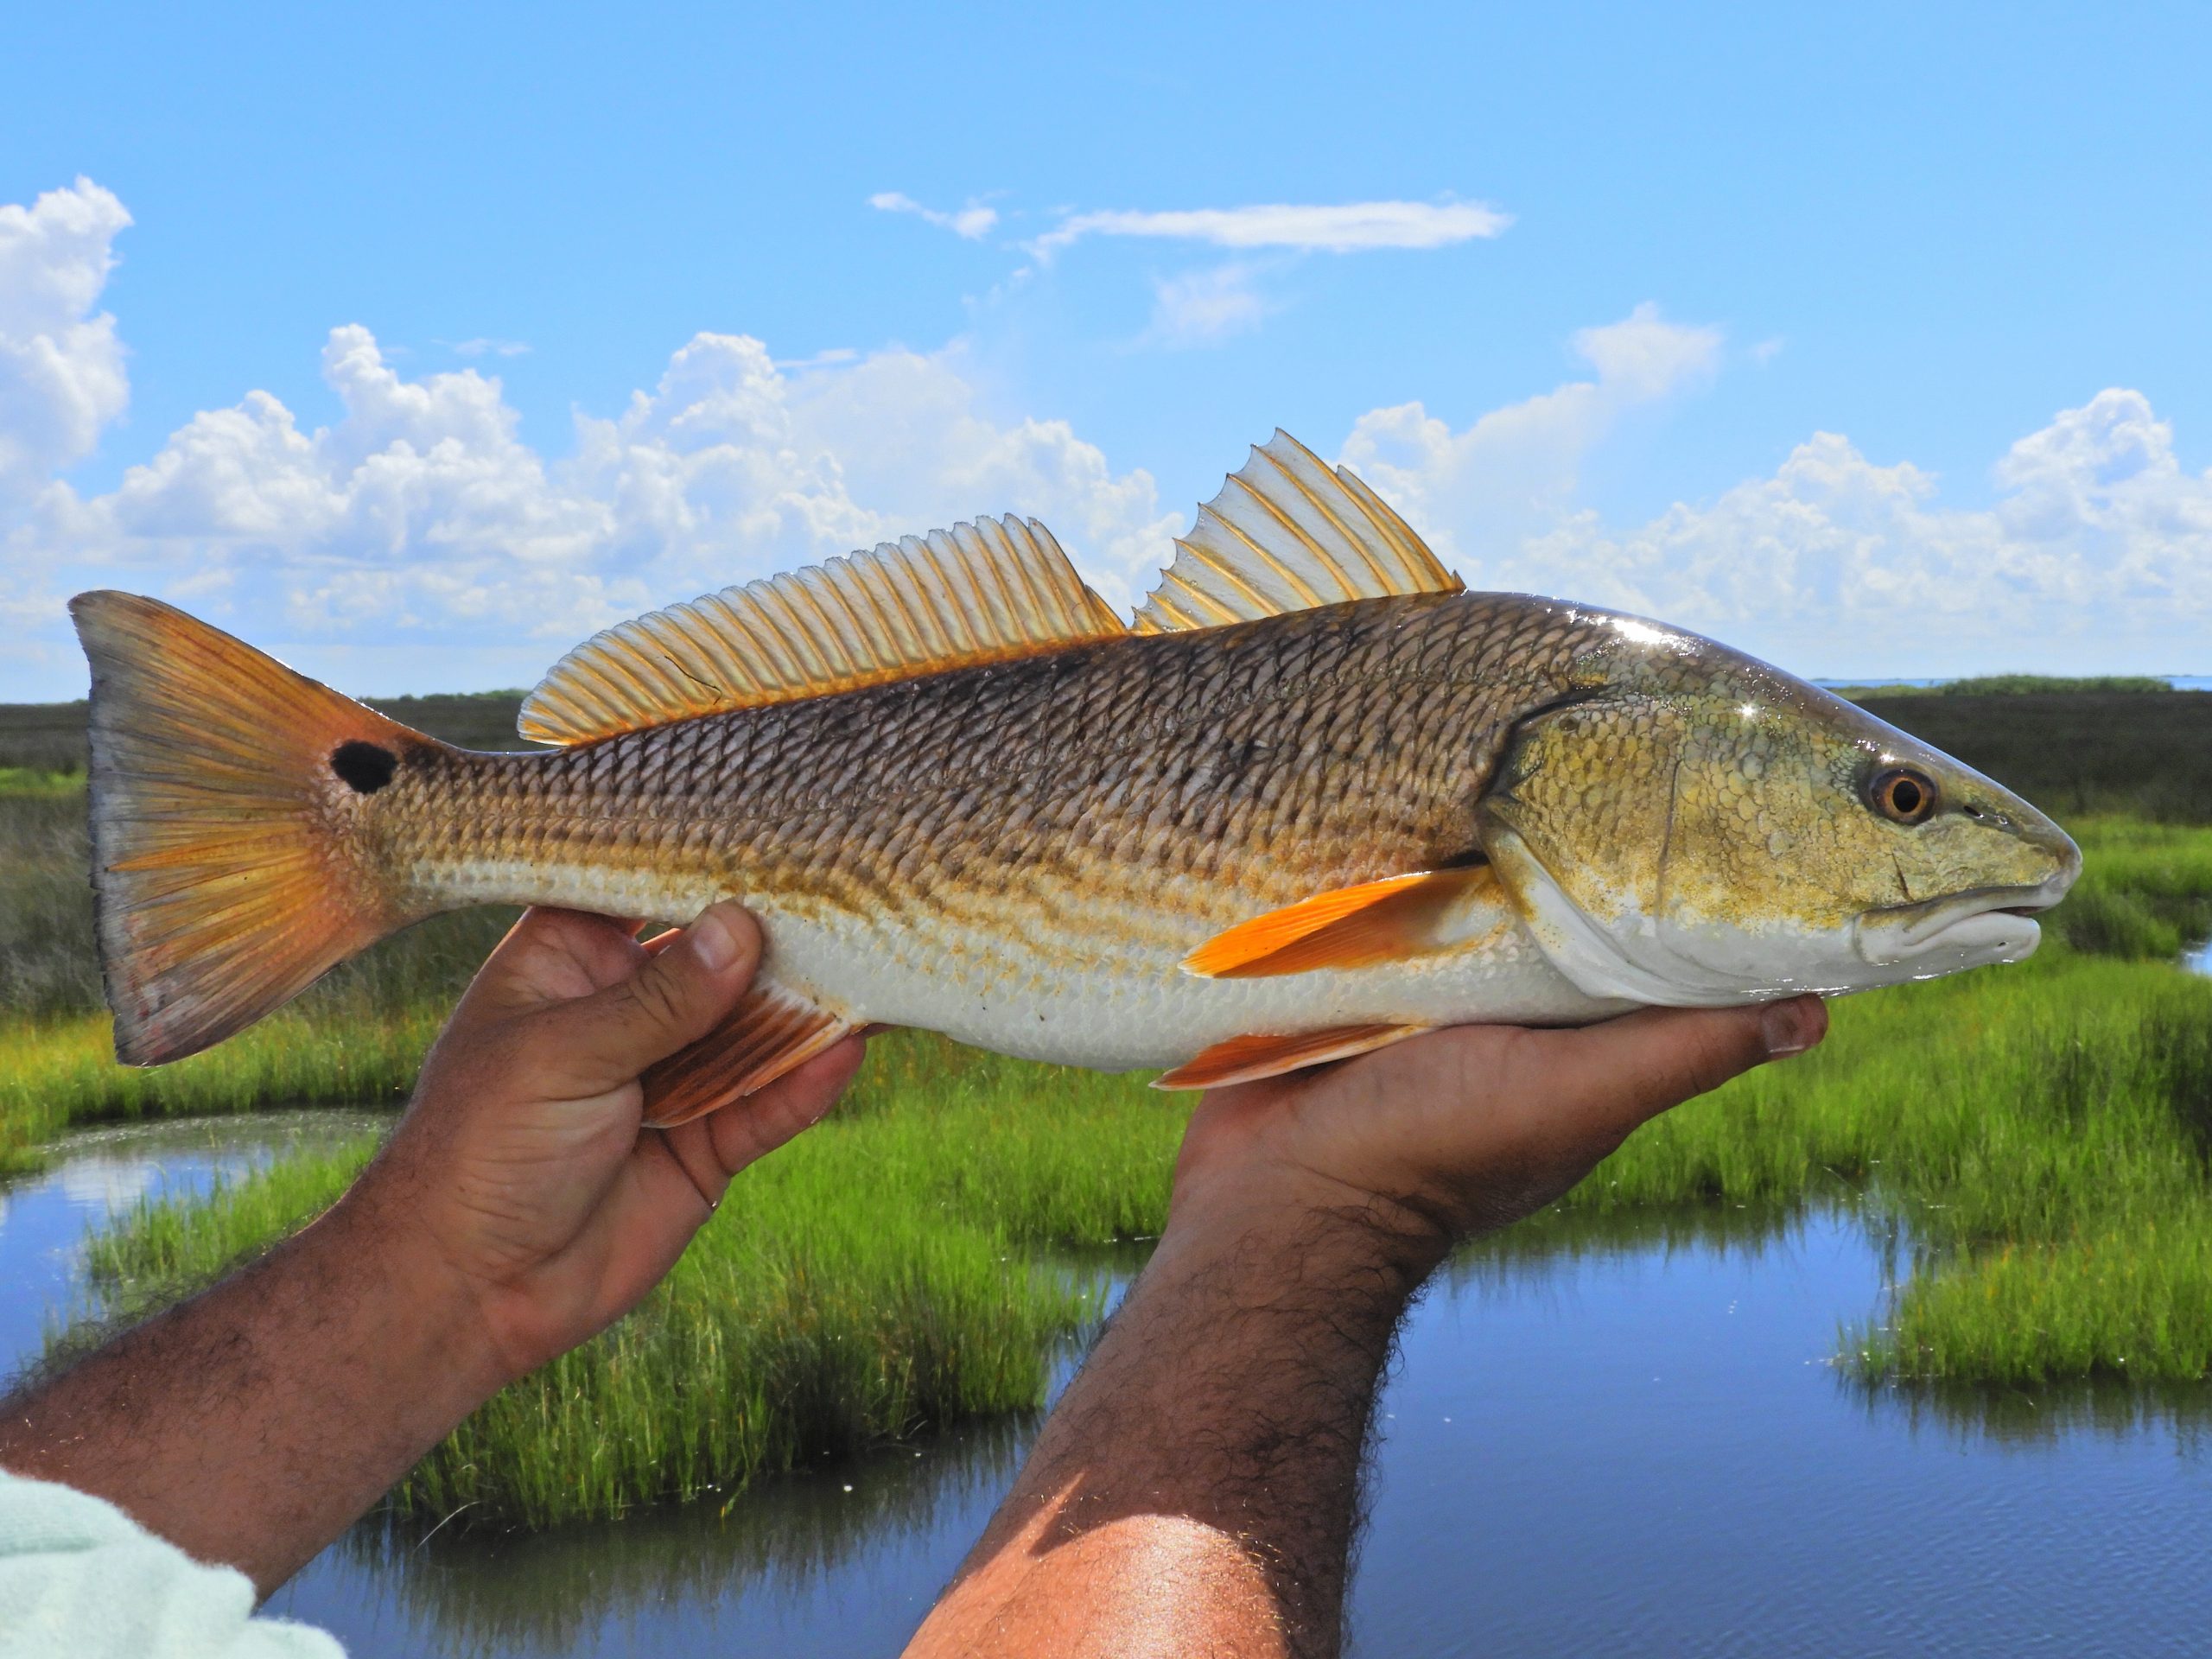 Summer Redfishing.How To Pick the Hot Spots - Saltwater Angler